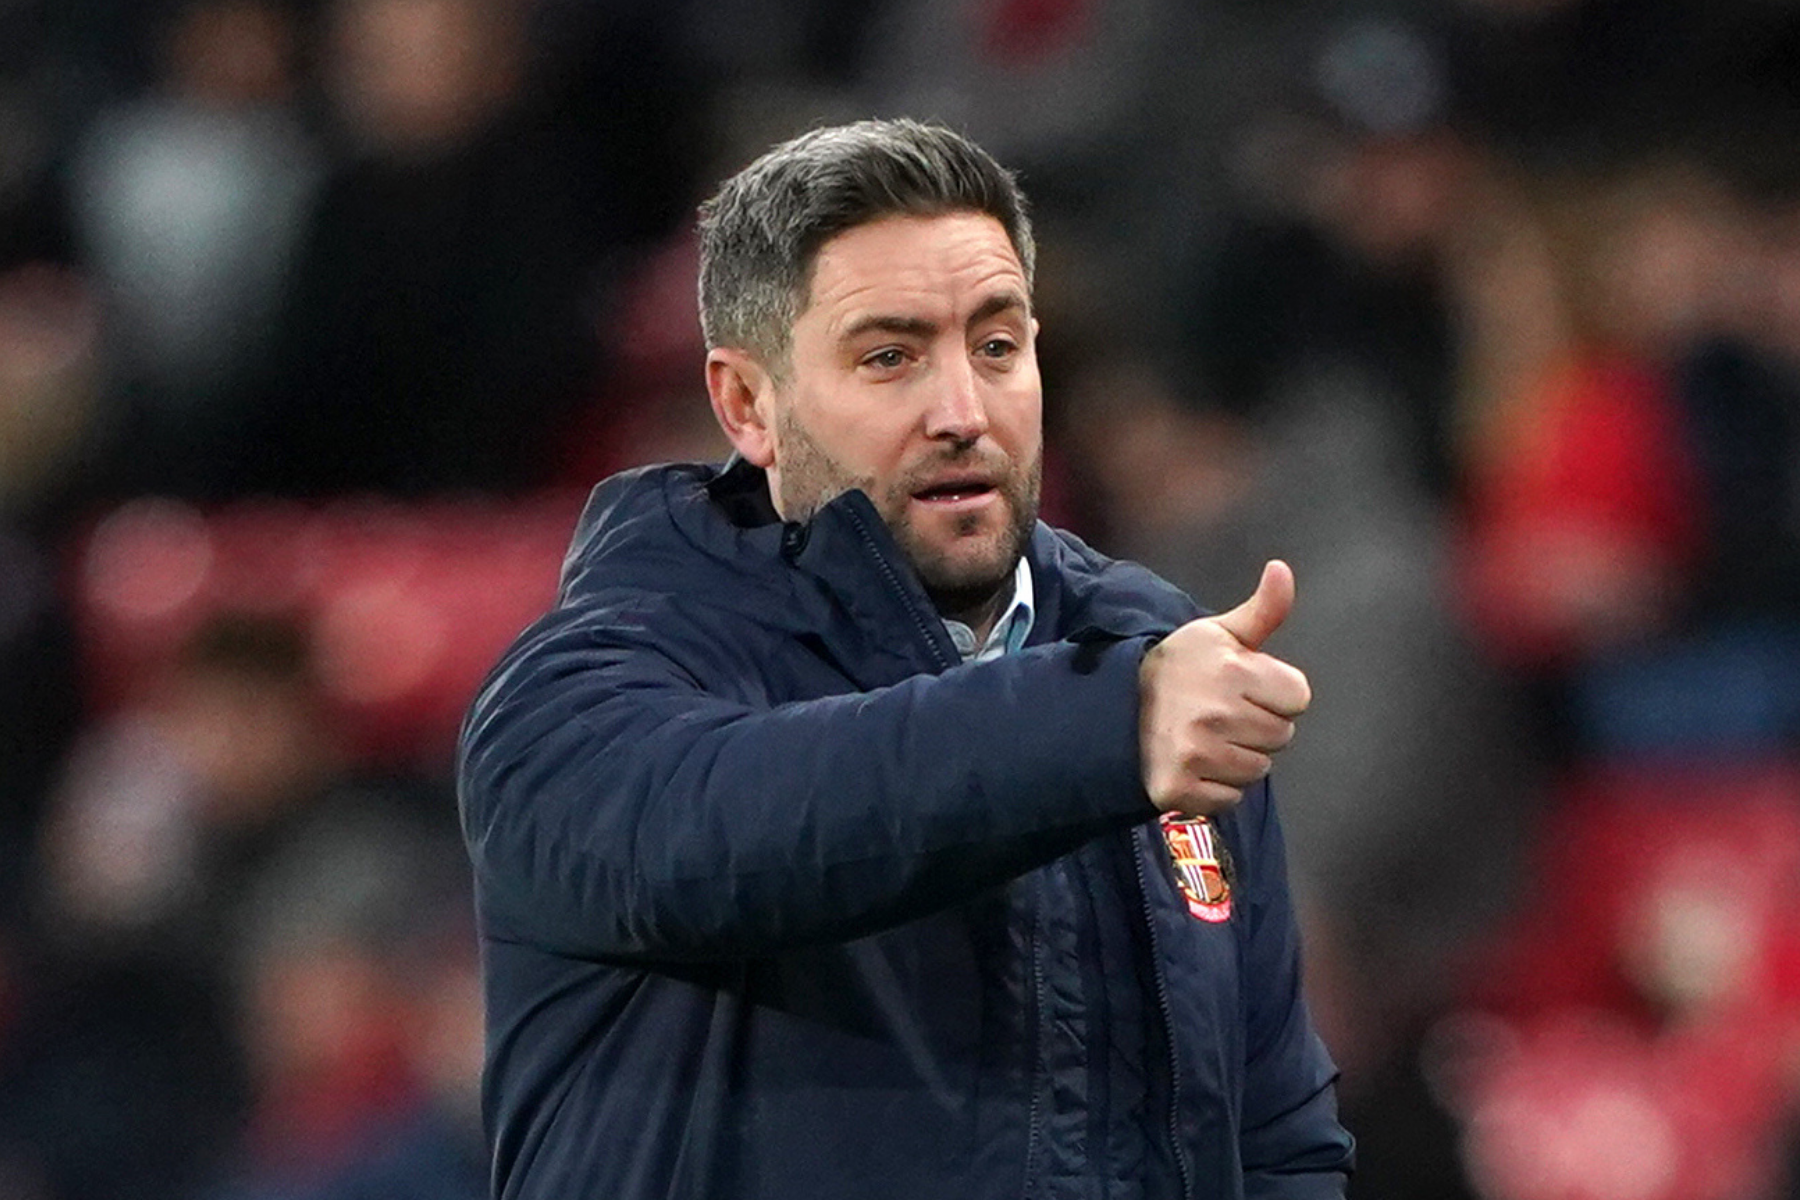 Hibs managerial candidate Lee Johnson insists he's always learning as he aims for dugout return